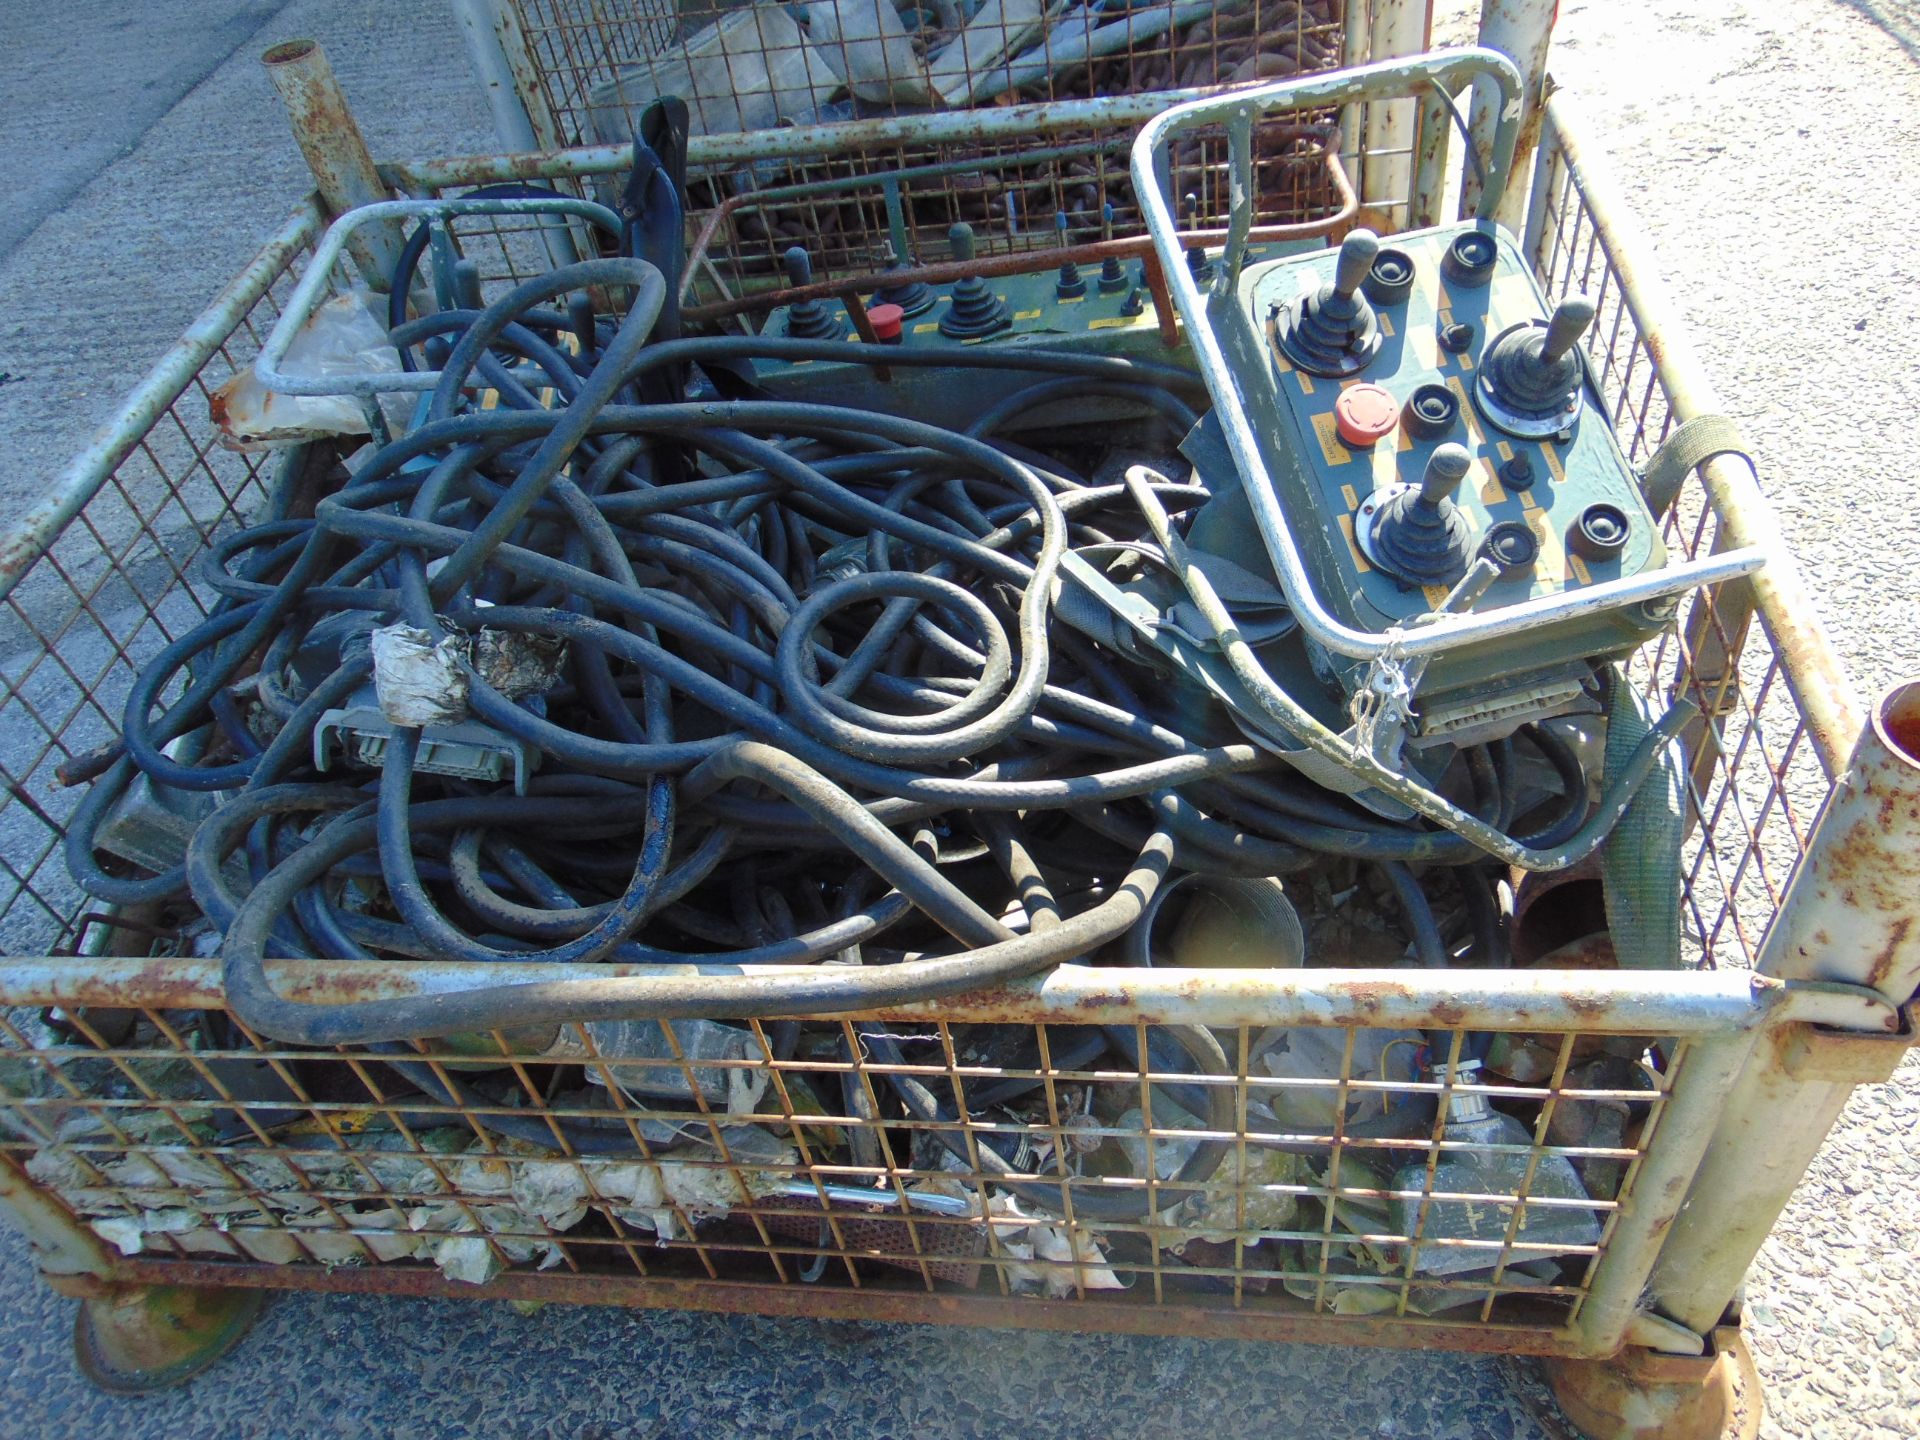 Pallet of Recovery Equipment inc. Crane/Winch Controls and Leads, Tools etc. - Image 2 of 3